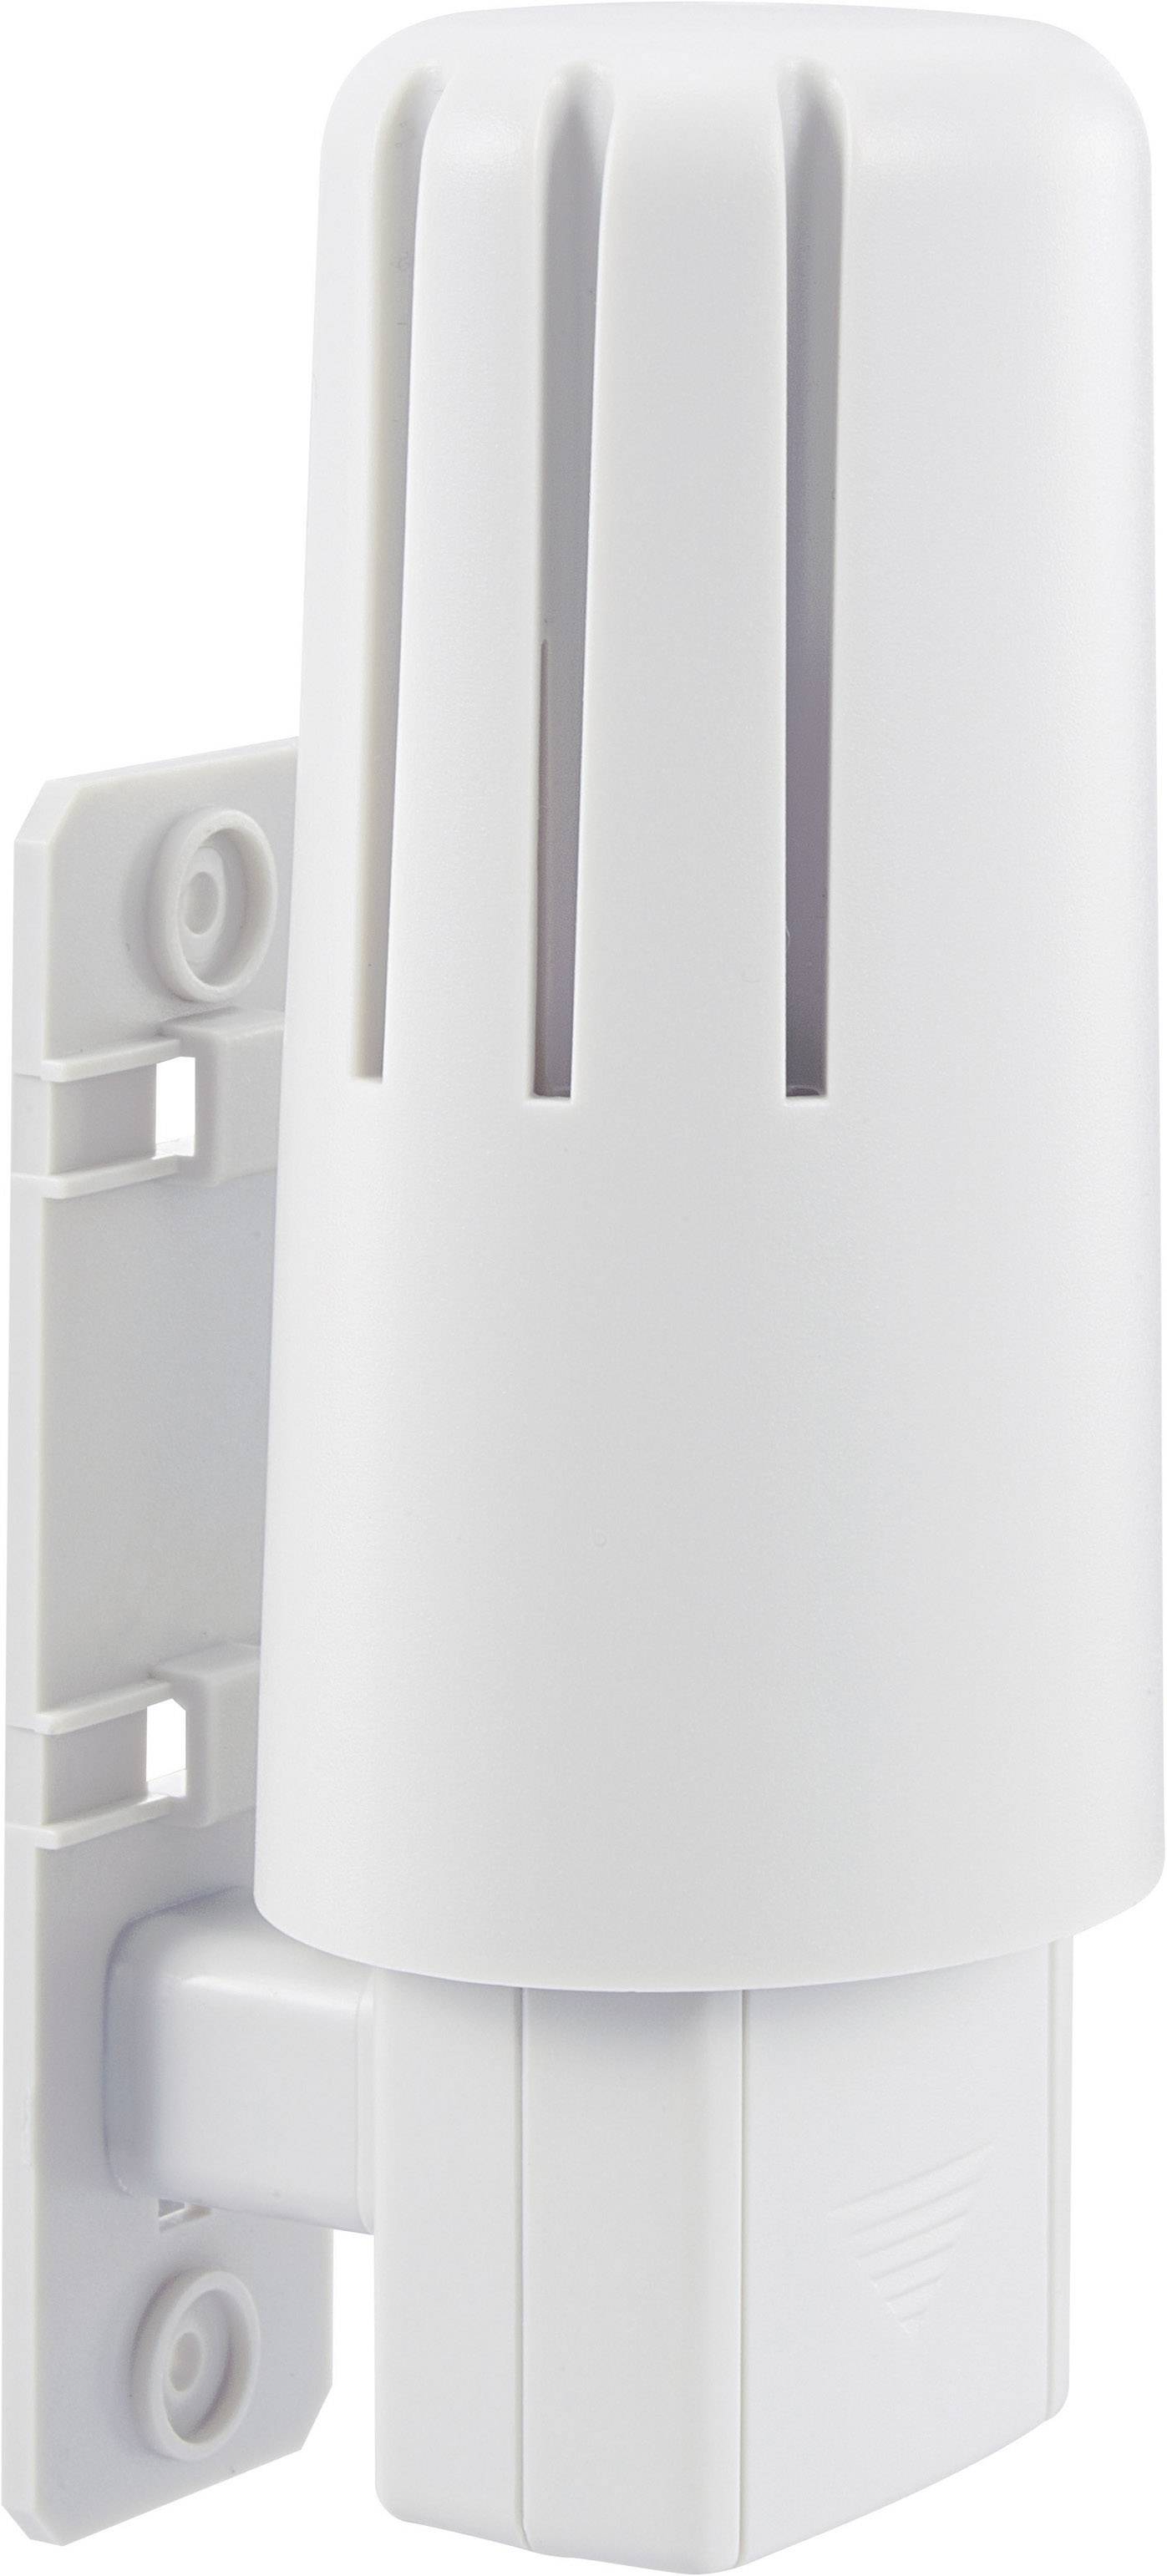 Outdoor TX21IT Wireless Hygr-Sensor Suitable With For The Weather Station  WS-8035IT | Conrad.com